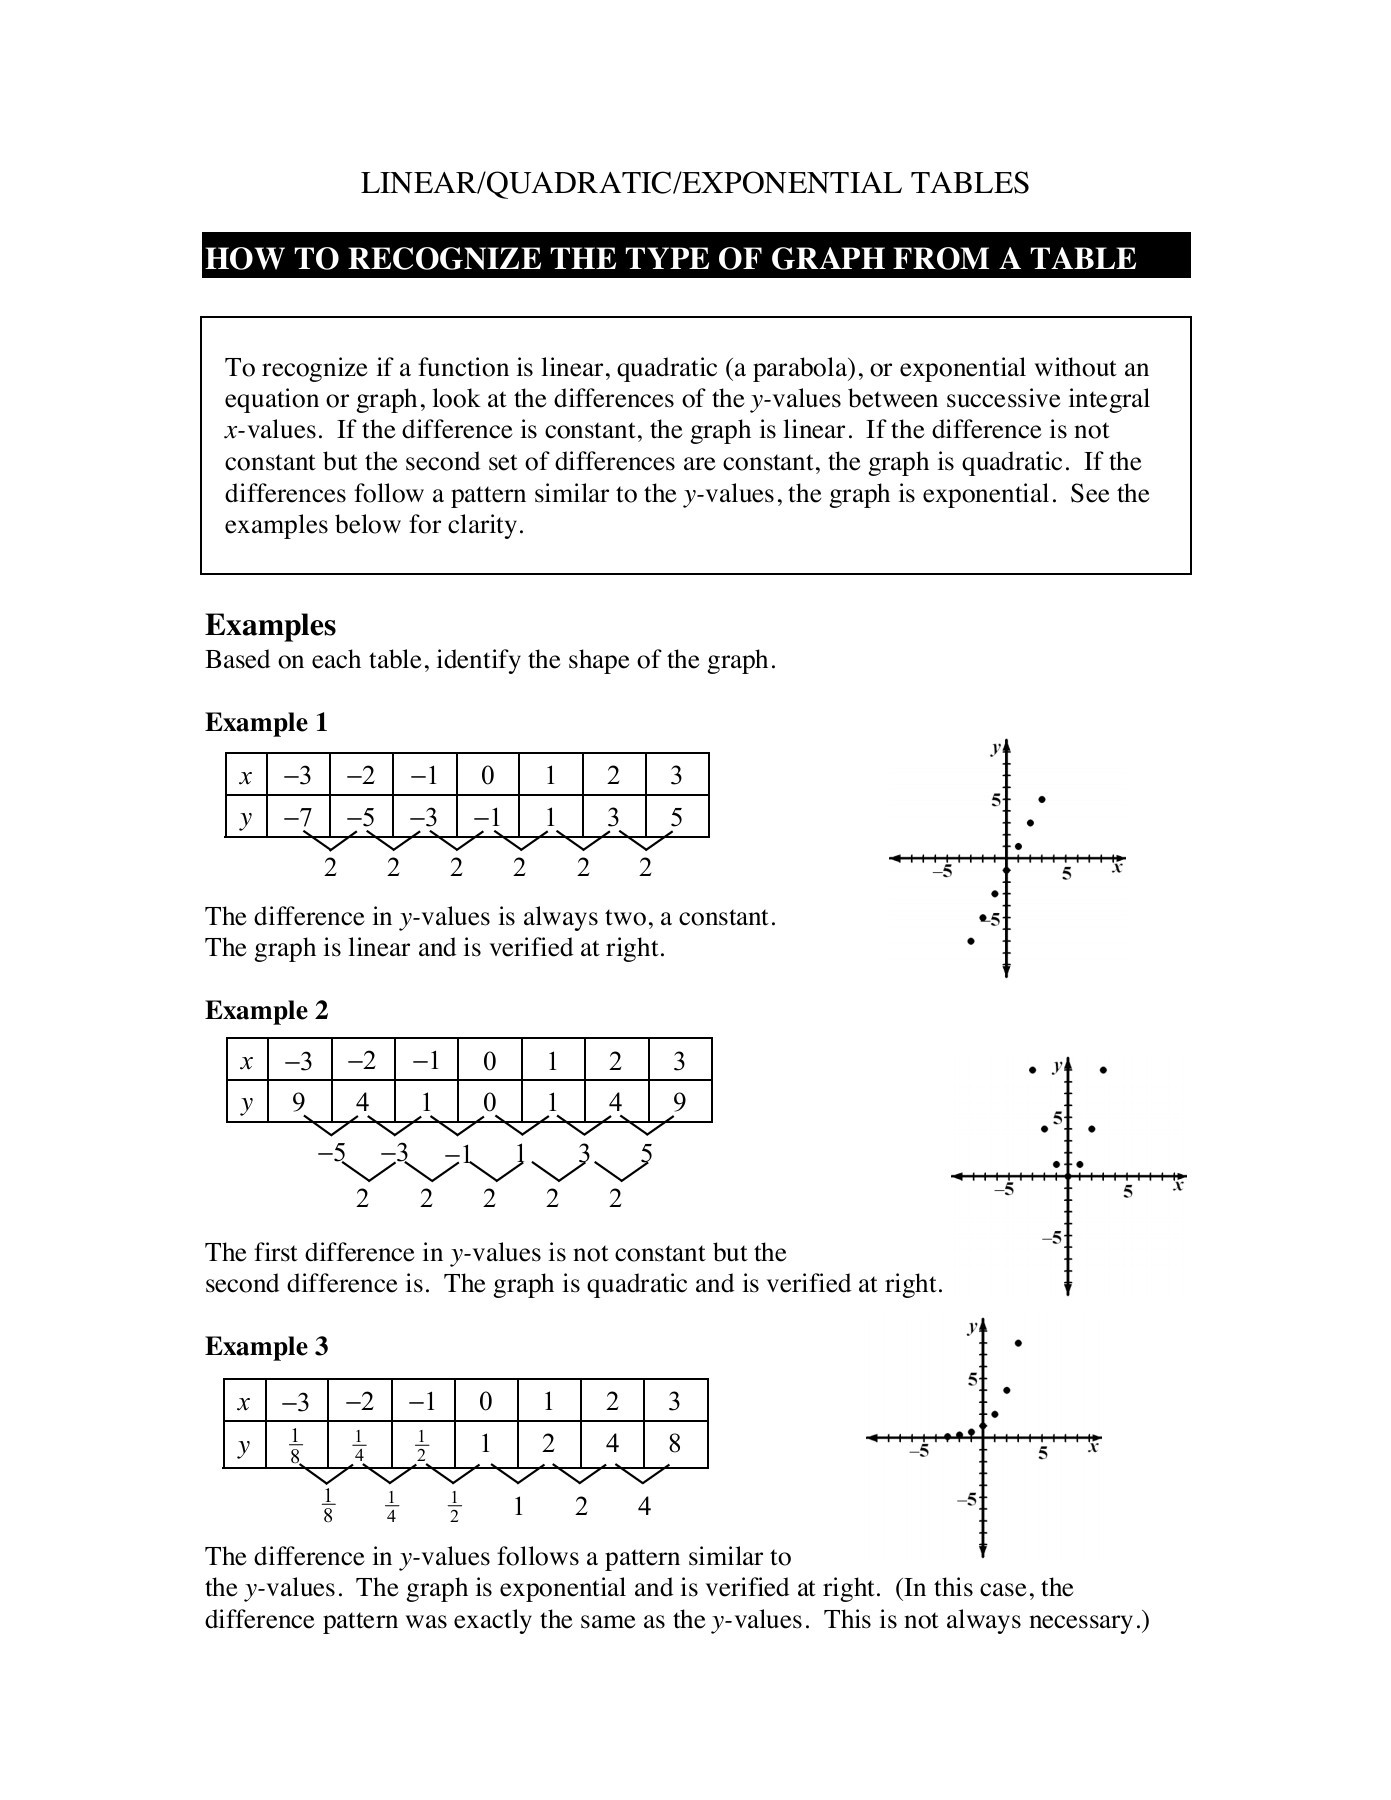 From Linear to Quadratic Worksheet Linear Quadratic Exponential Tables Cpm Educational Program